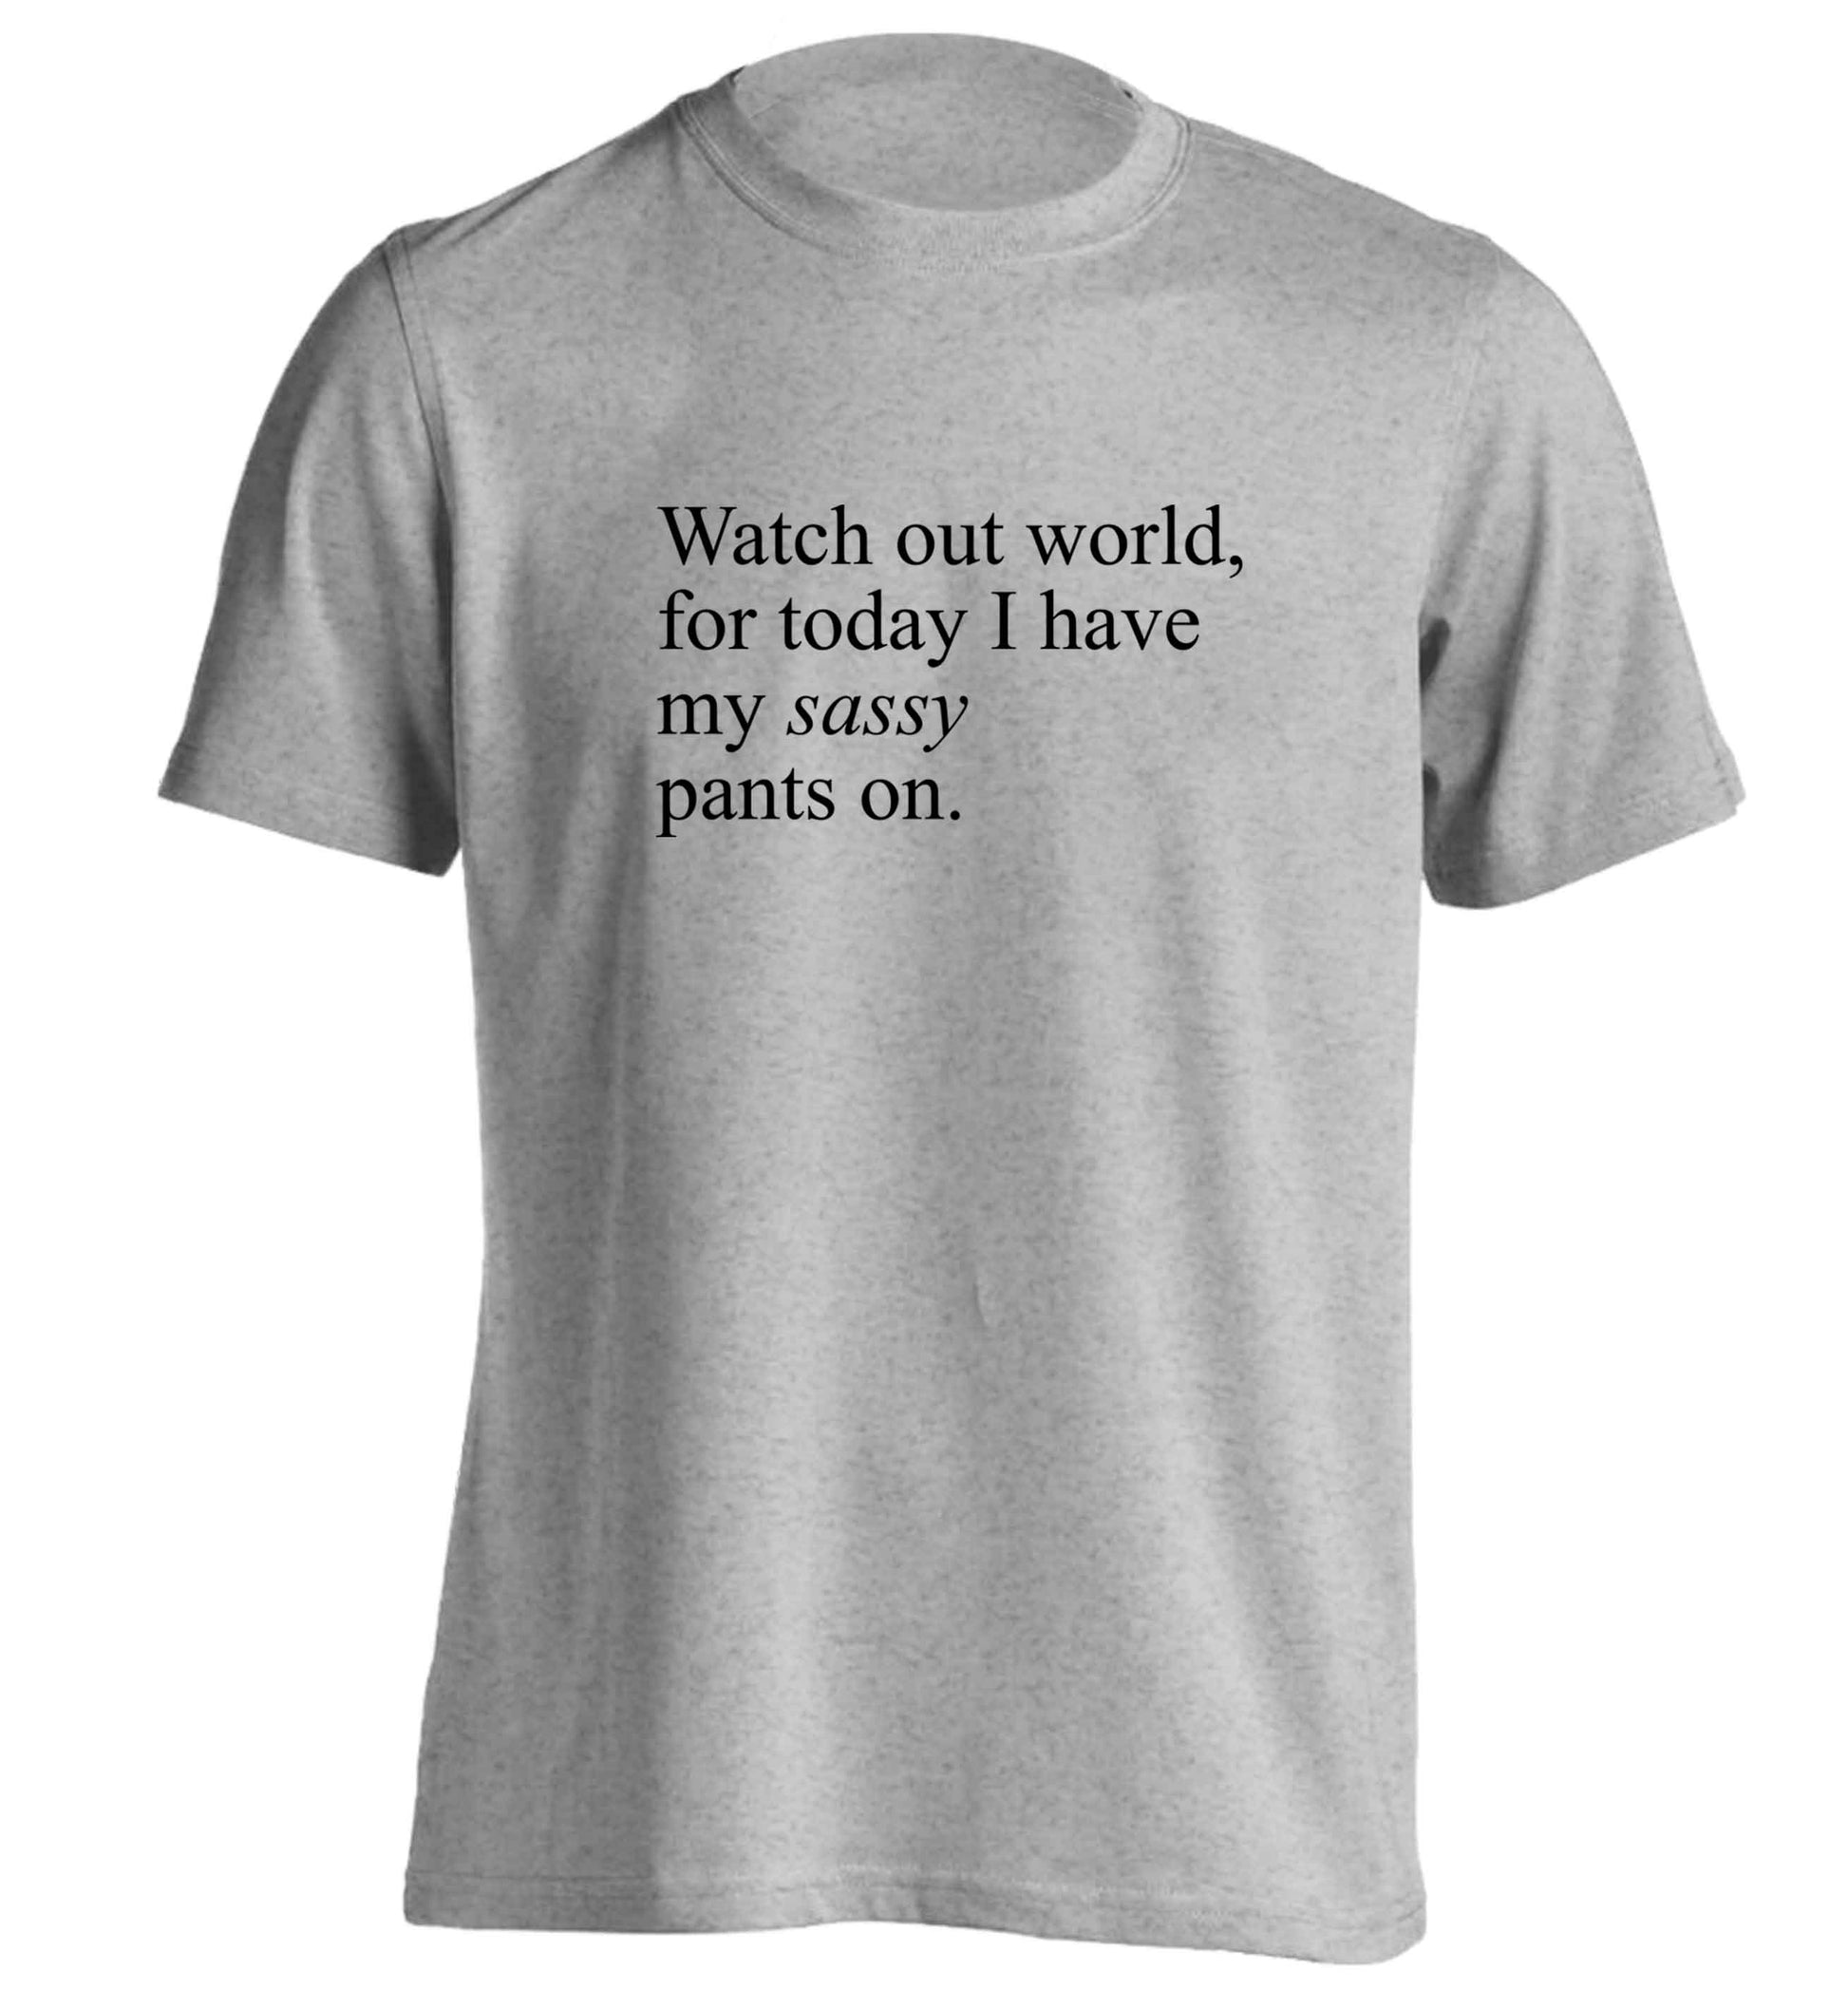 Watch out world for today I have my sassy pants on adults unisex grey Tshirt 2XL